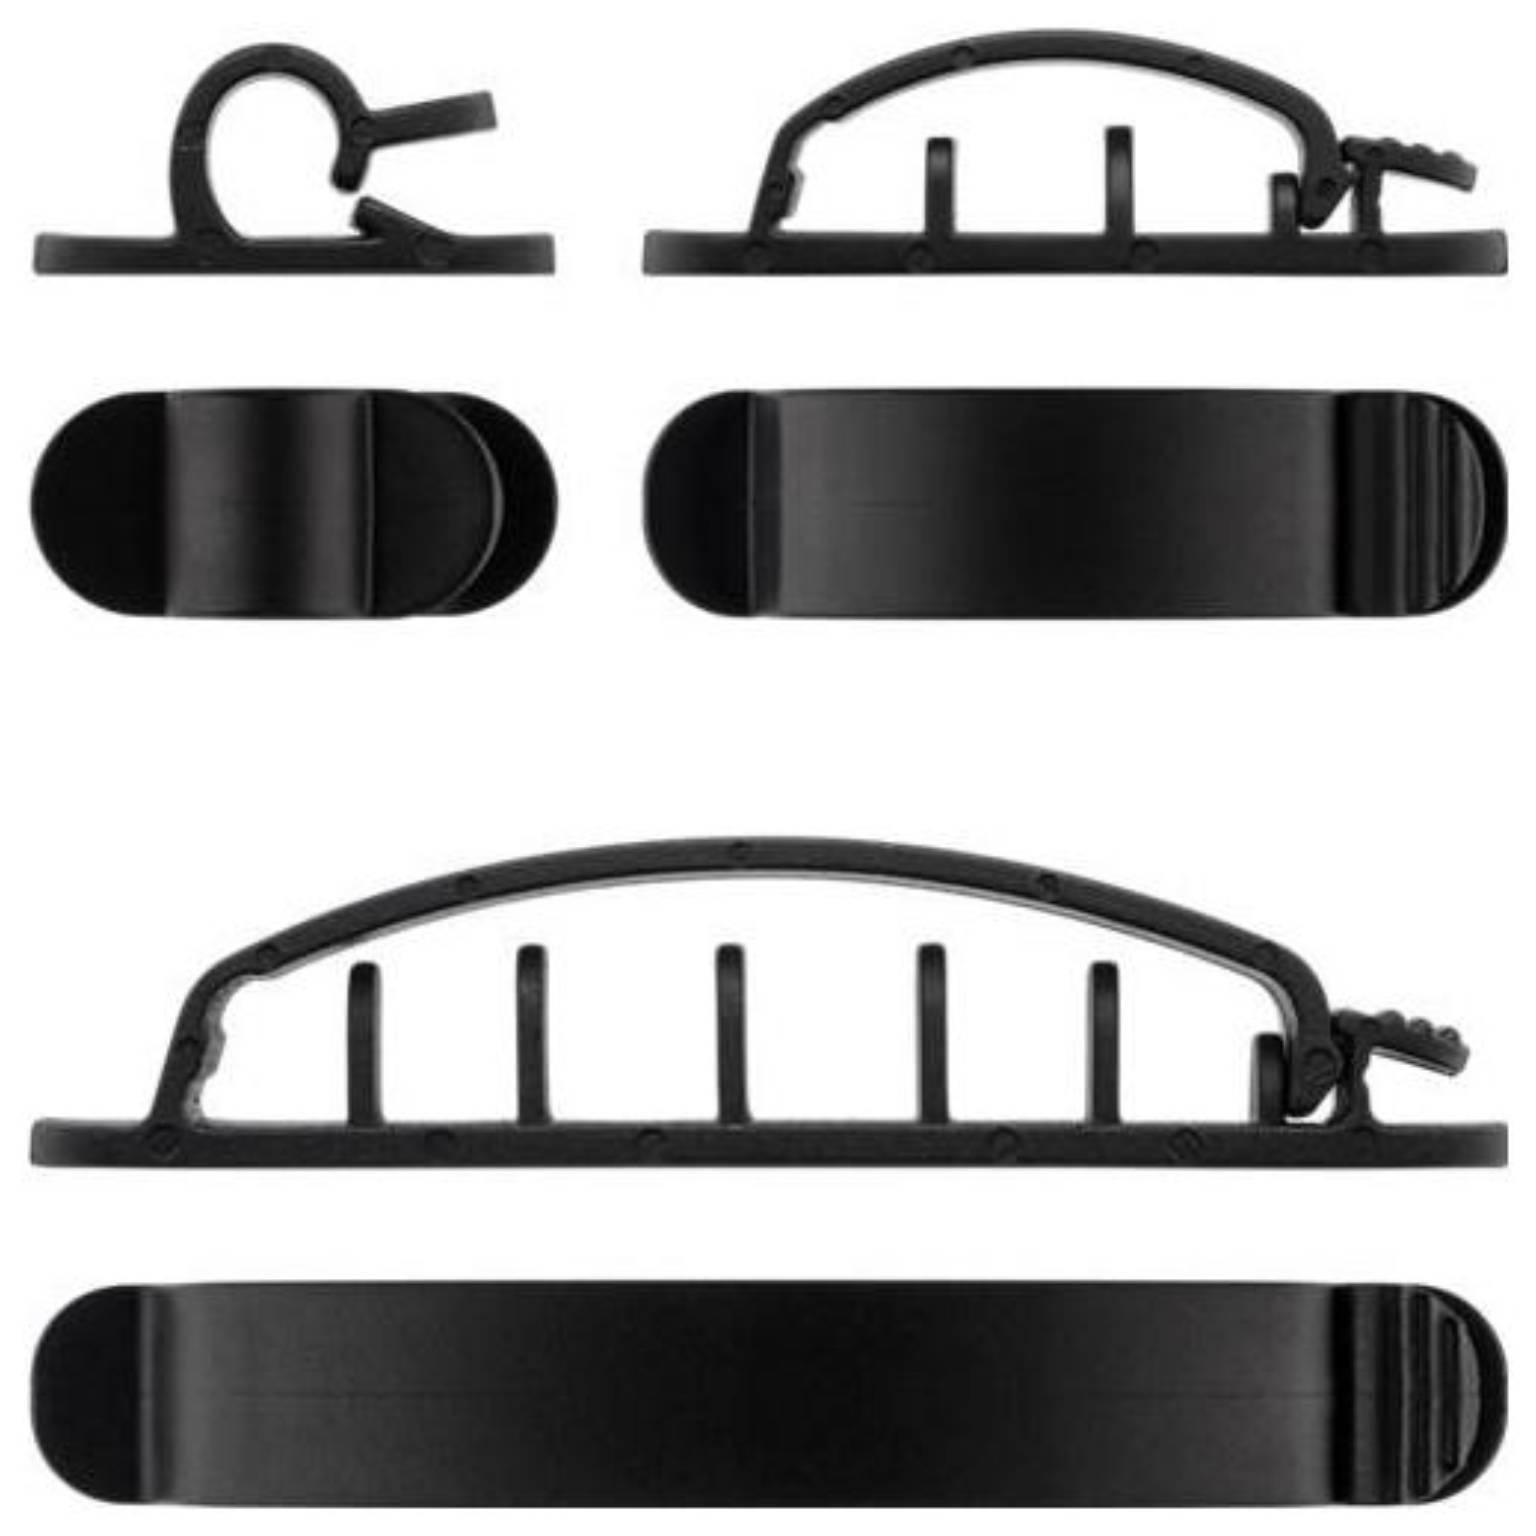 Cable management clip set, black 6-piece set for organising and attachi - Goobay